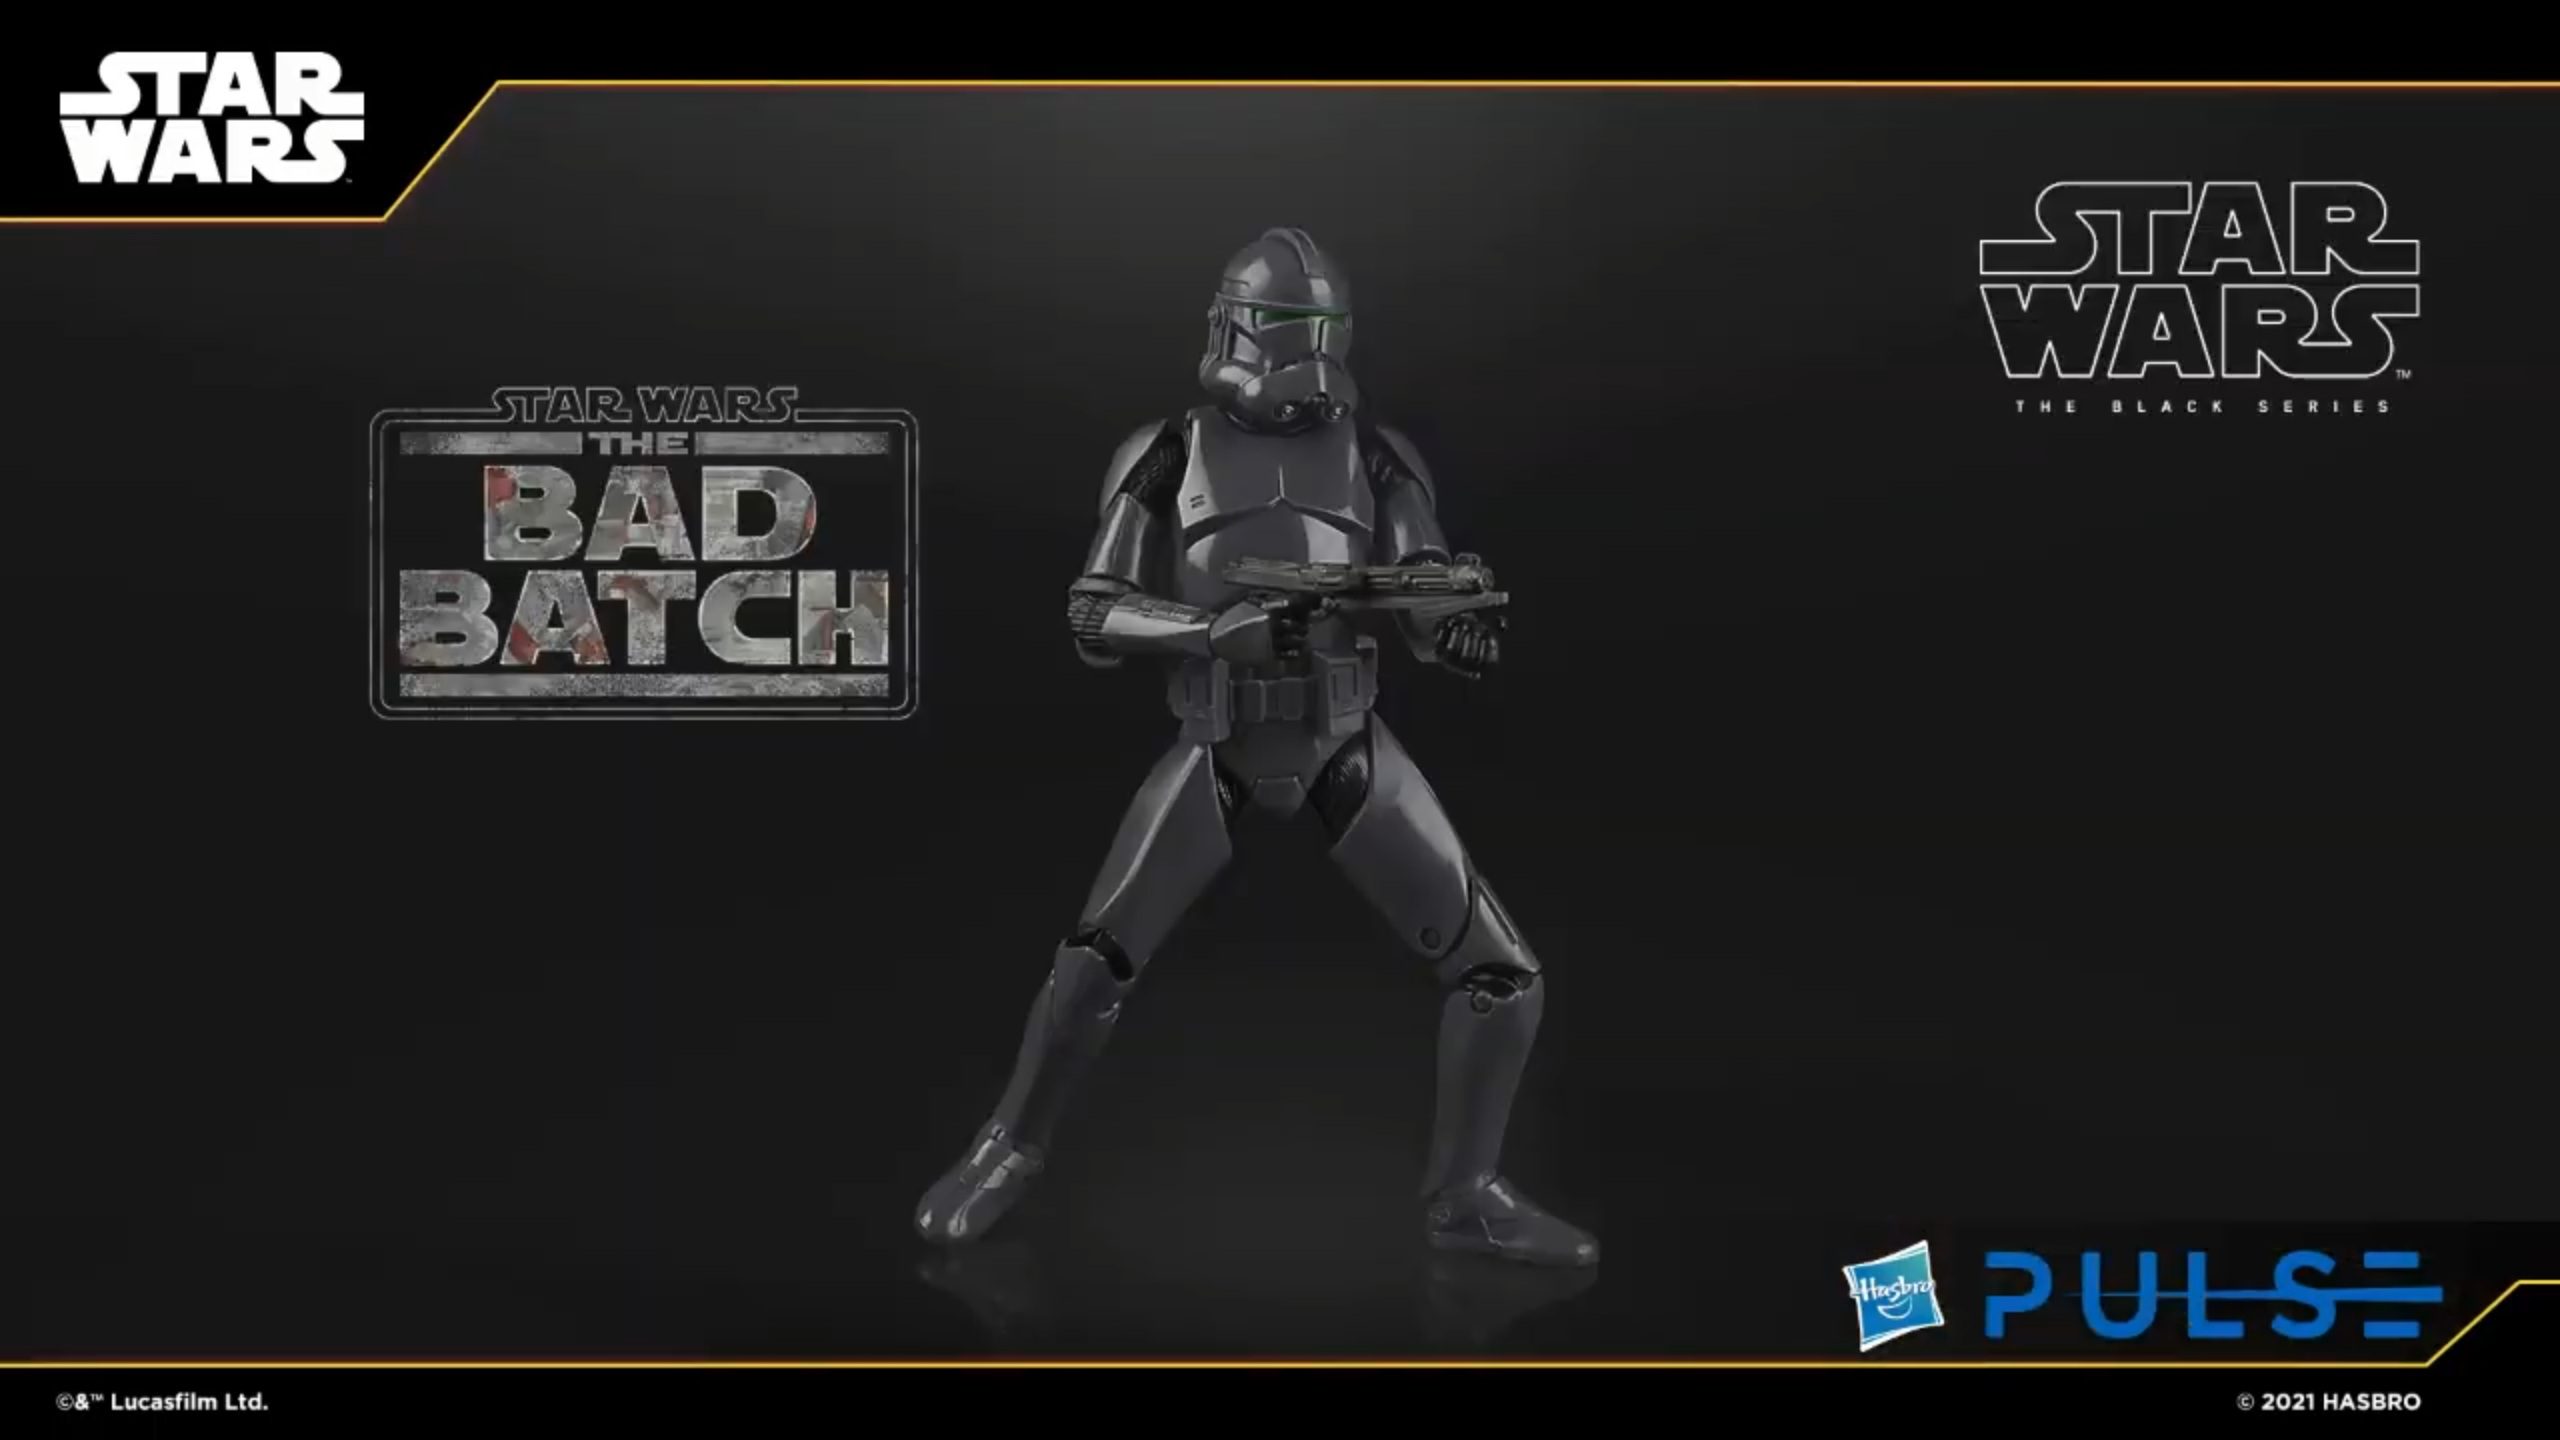 Star Wars The Bad Batch 2021 Wallpapers